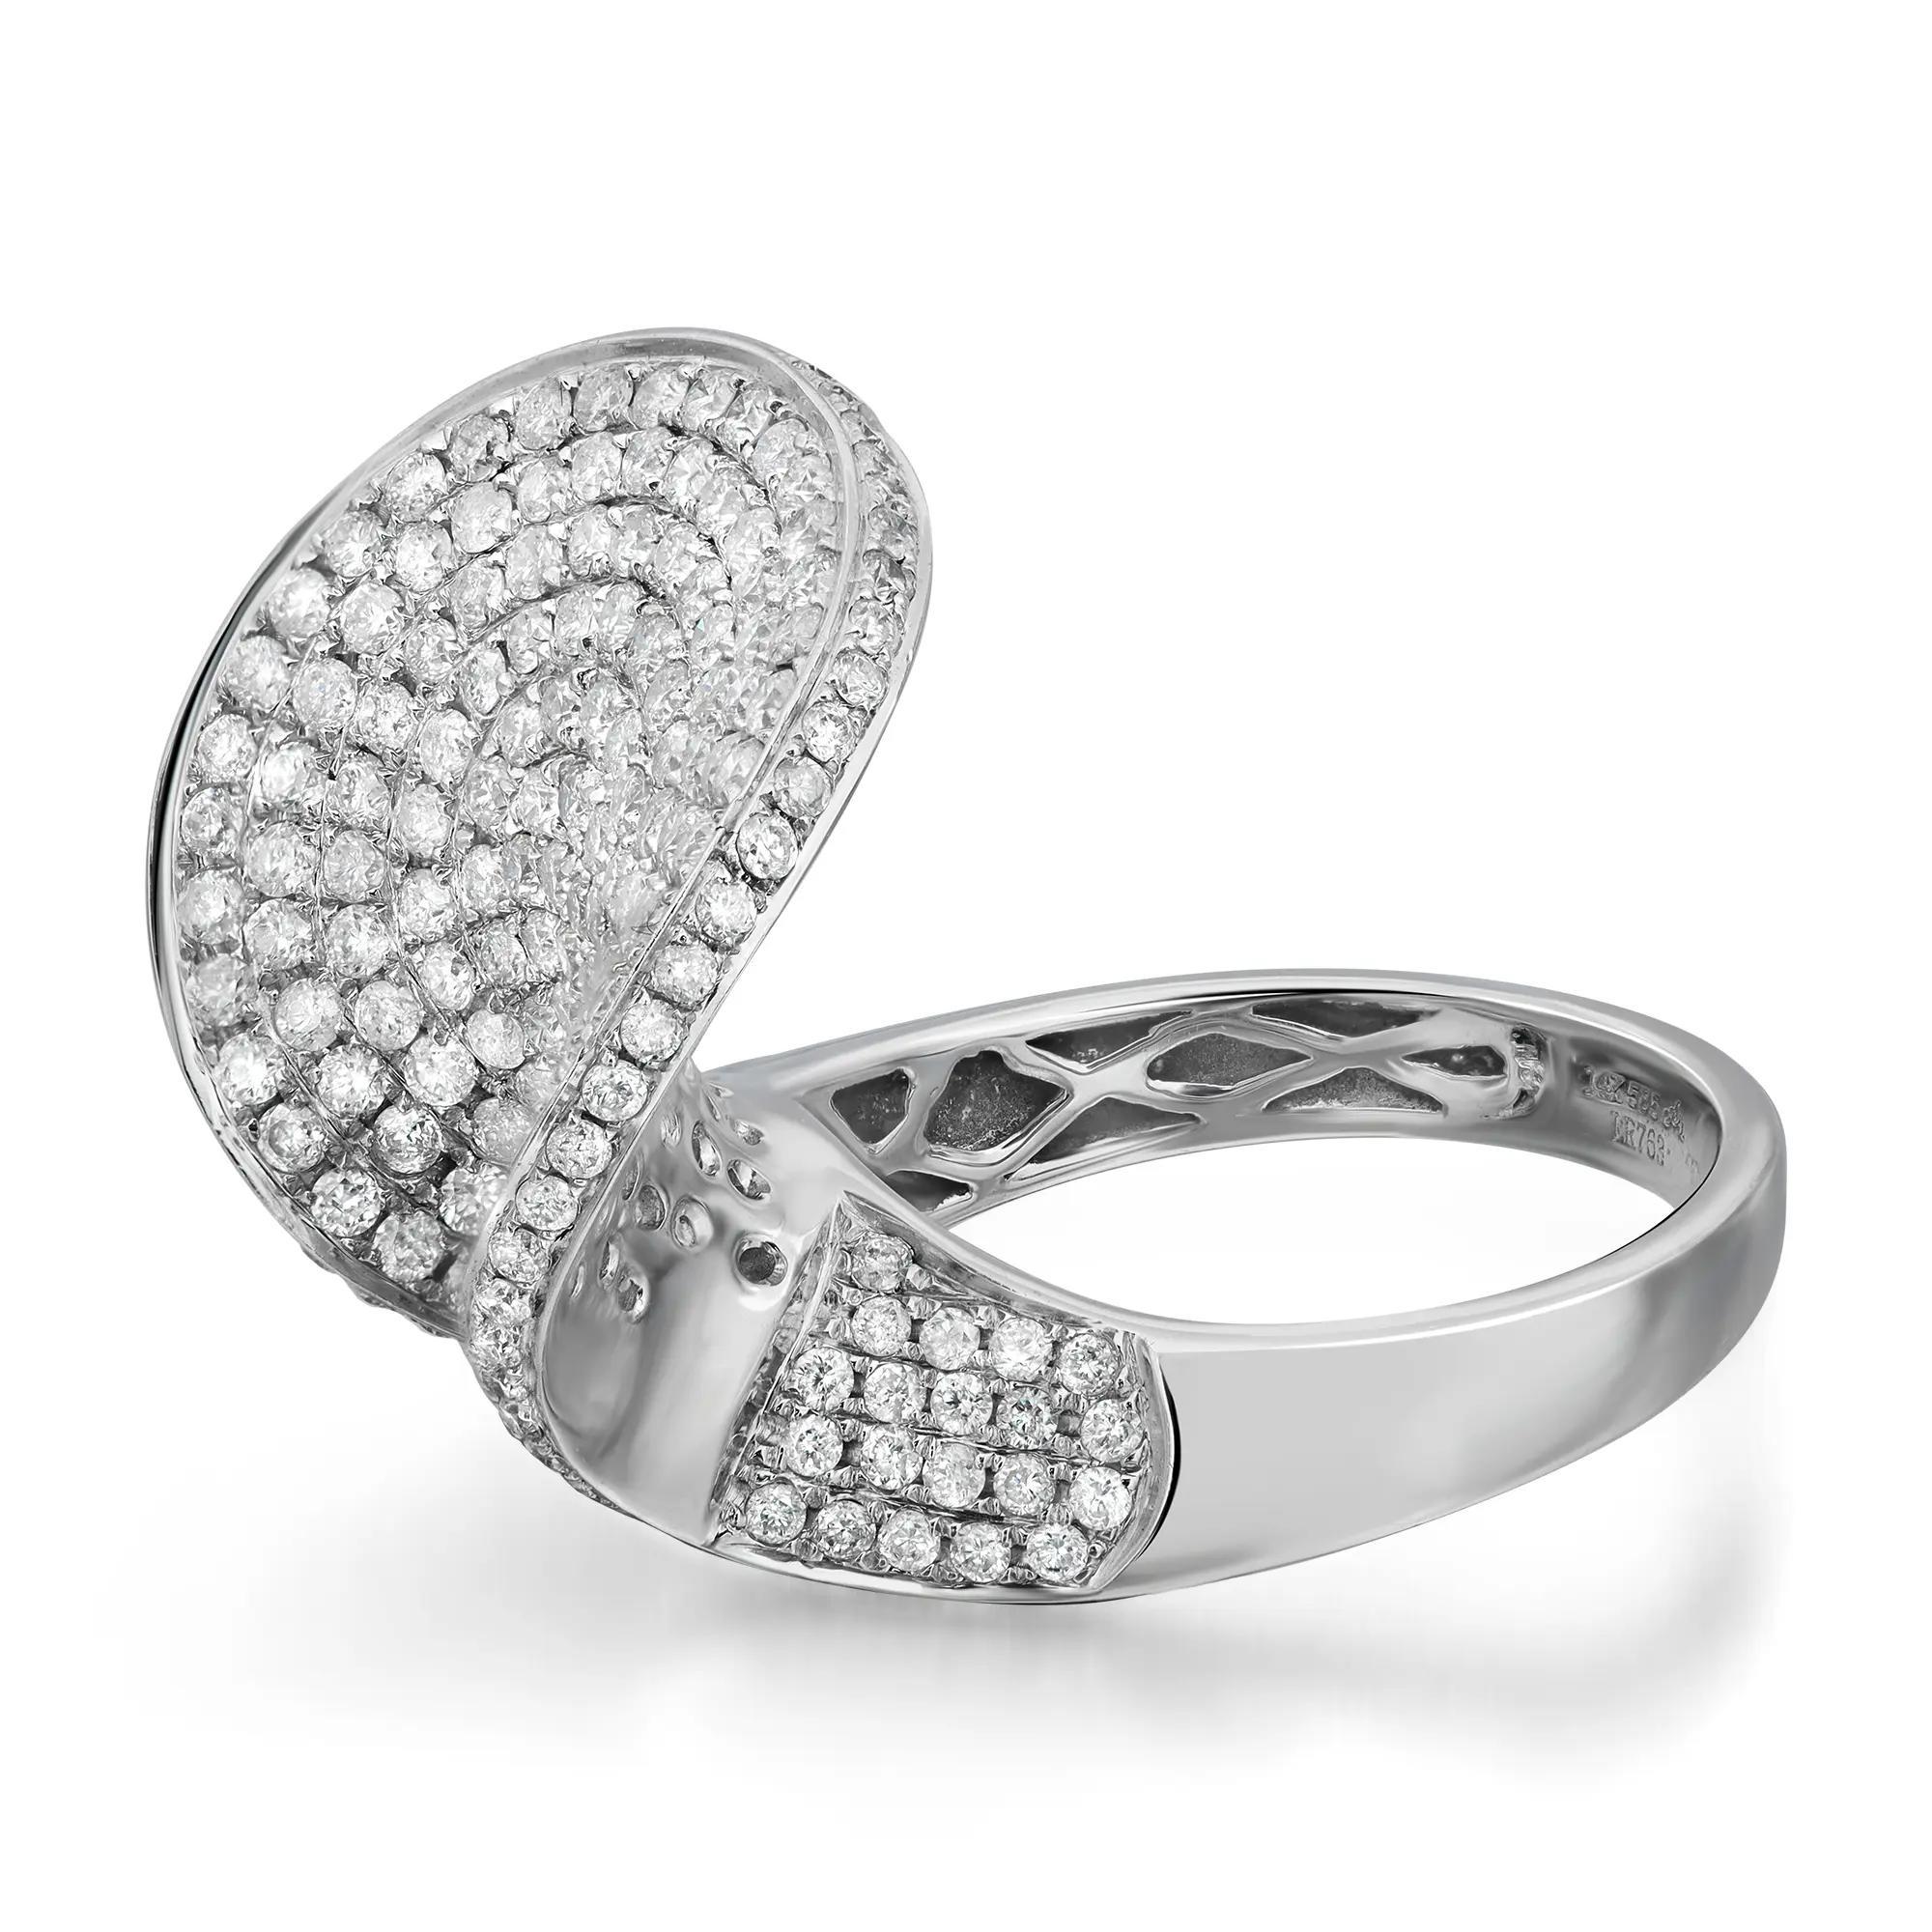 2.32Cttw Pave Set Round Cut Diamond Ladies Cocktail Ring 14K White Gold Size 7.5 In New Condition For Sale In New York, NY